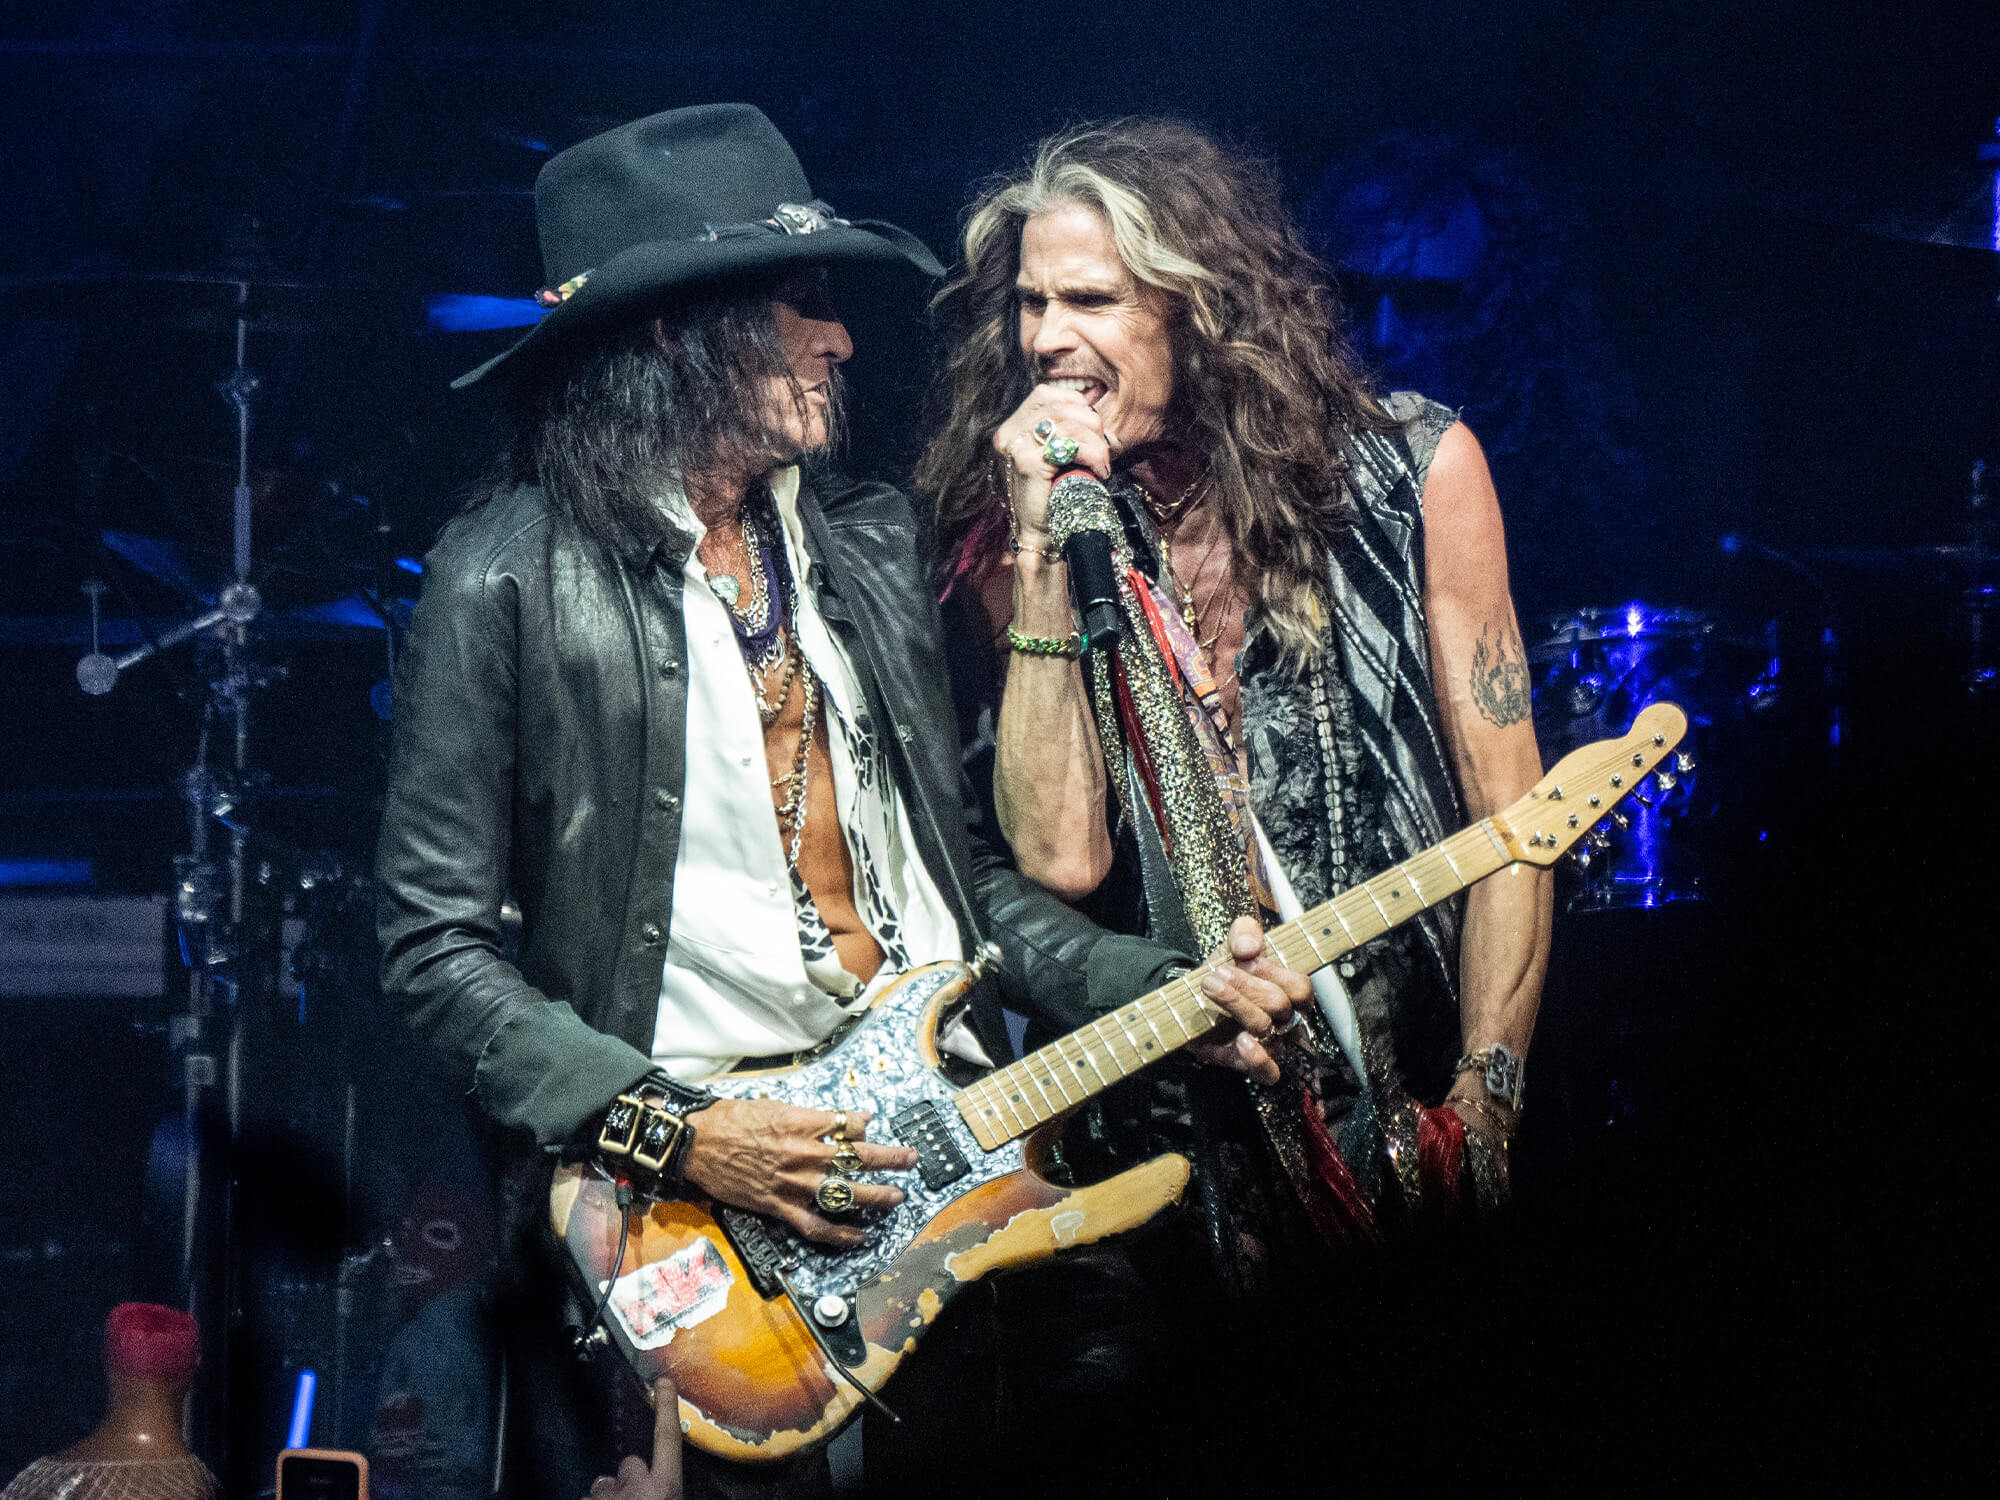 Joe Perry playing guitar next to vocalist Steven Tyler who is singing into a mic and looking back at him